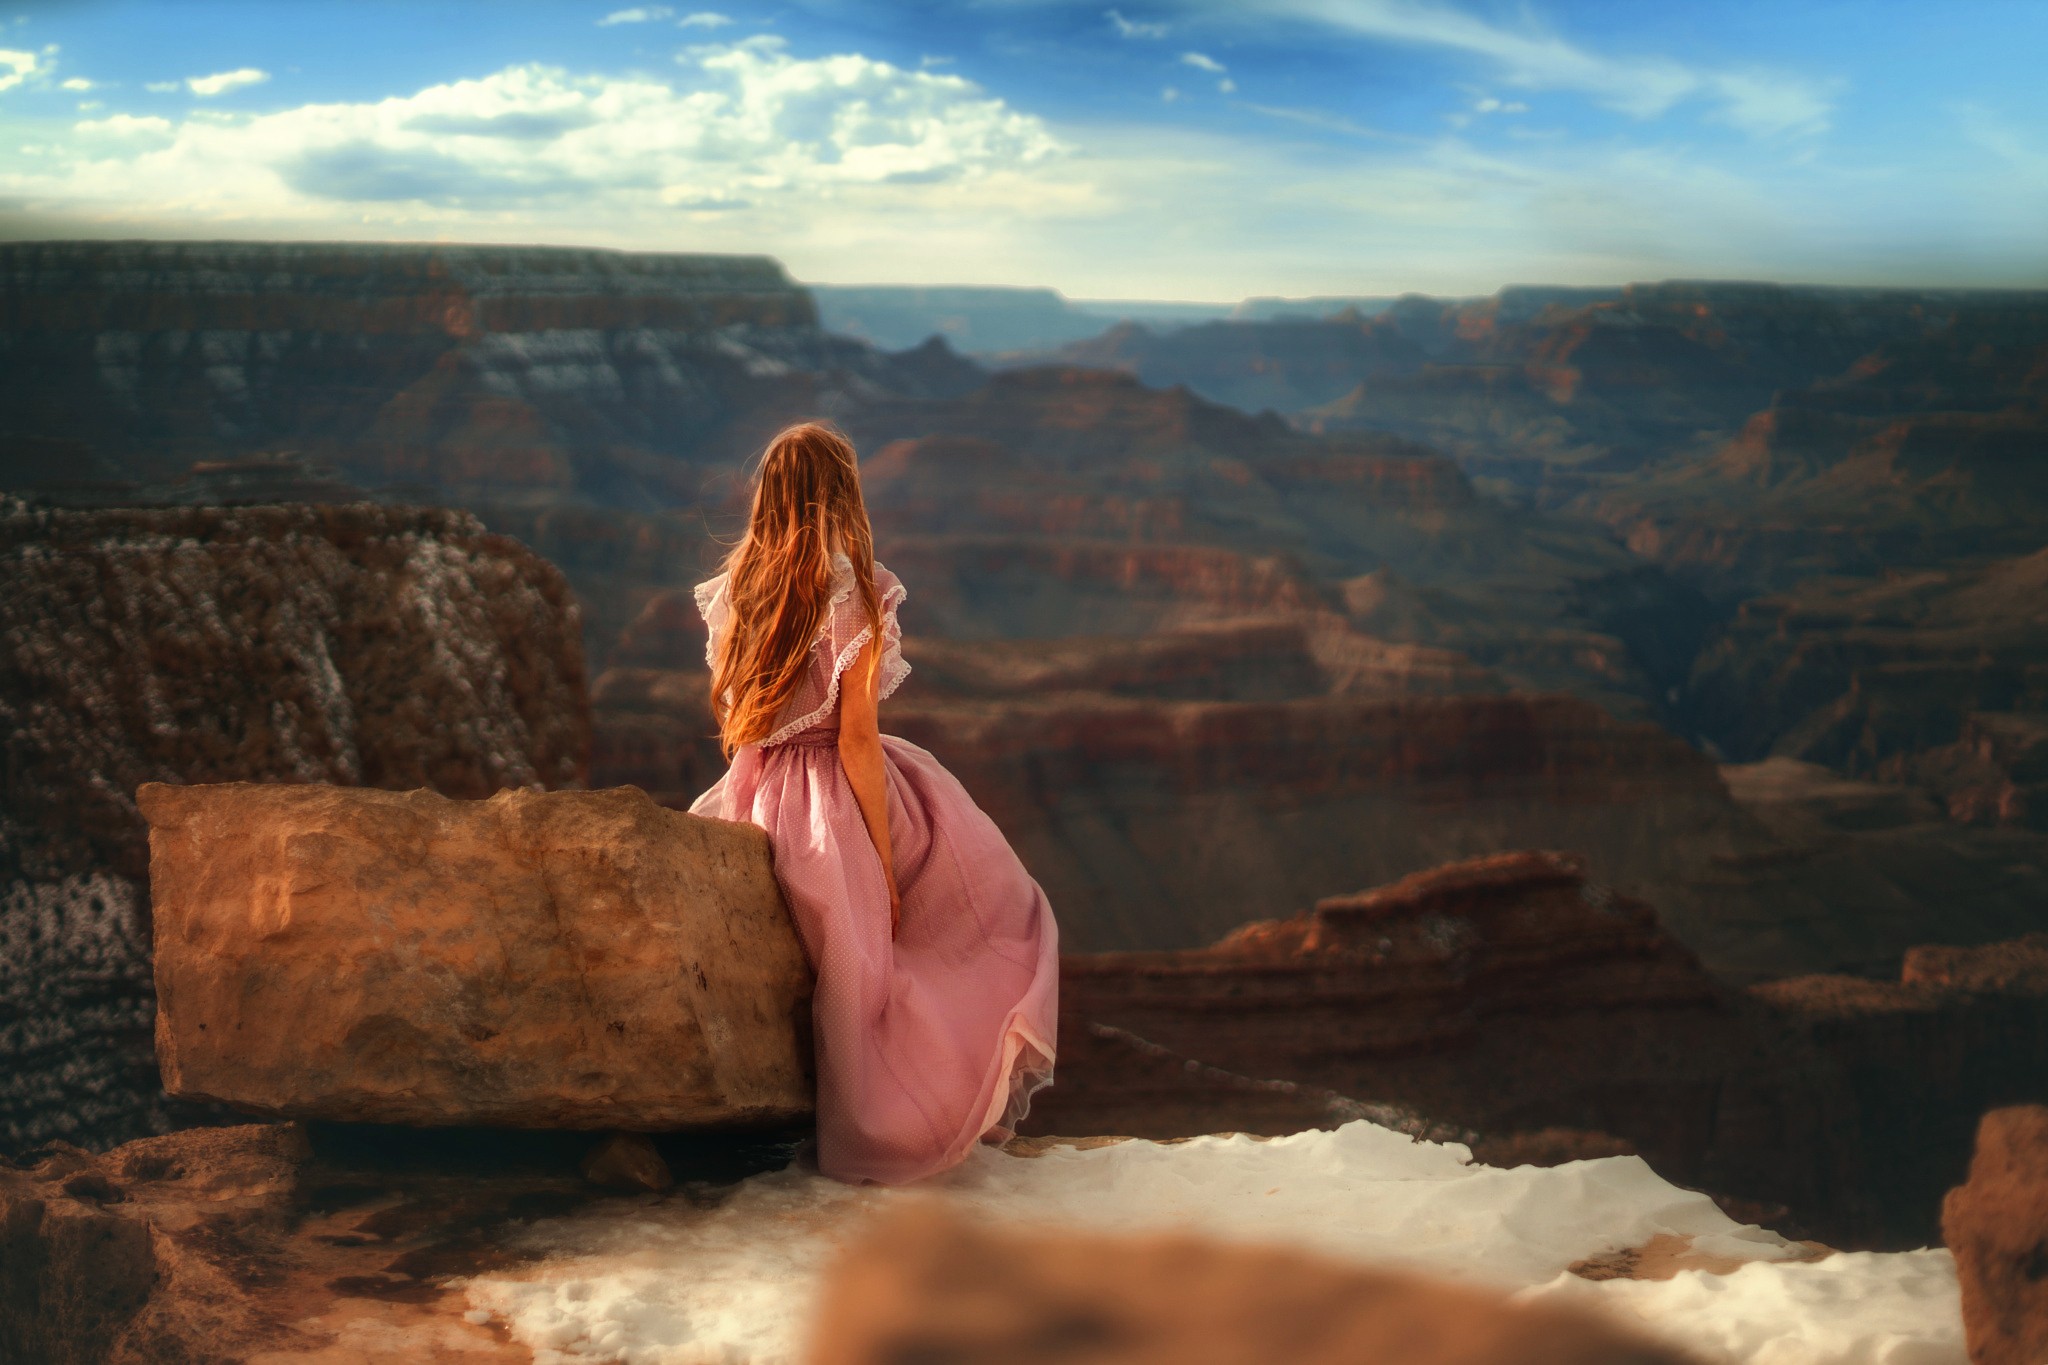 People 2048x1365 redhead model women pink dress Grand Canyon sky clouds women outdoors rocks USA pink clothing long hair looking into the distance rock formation